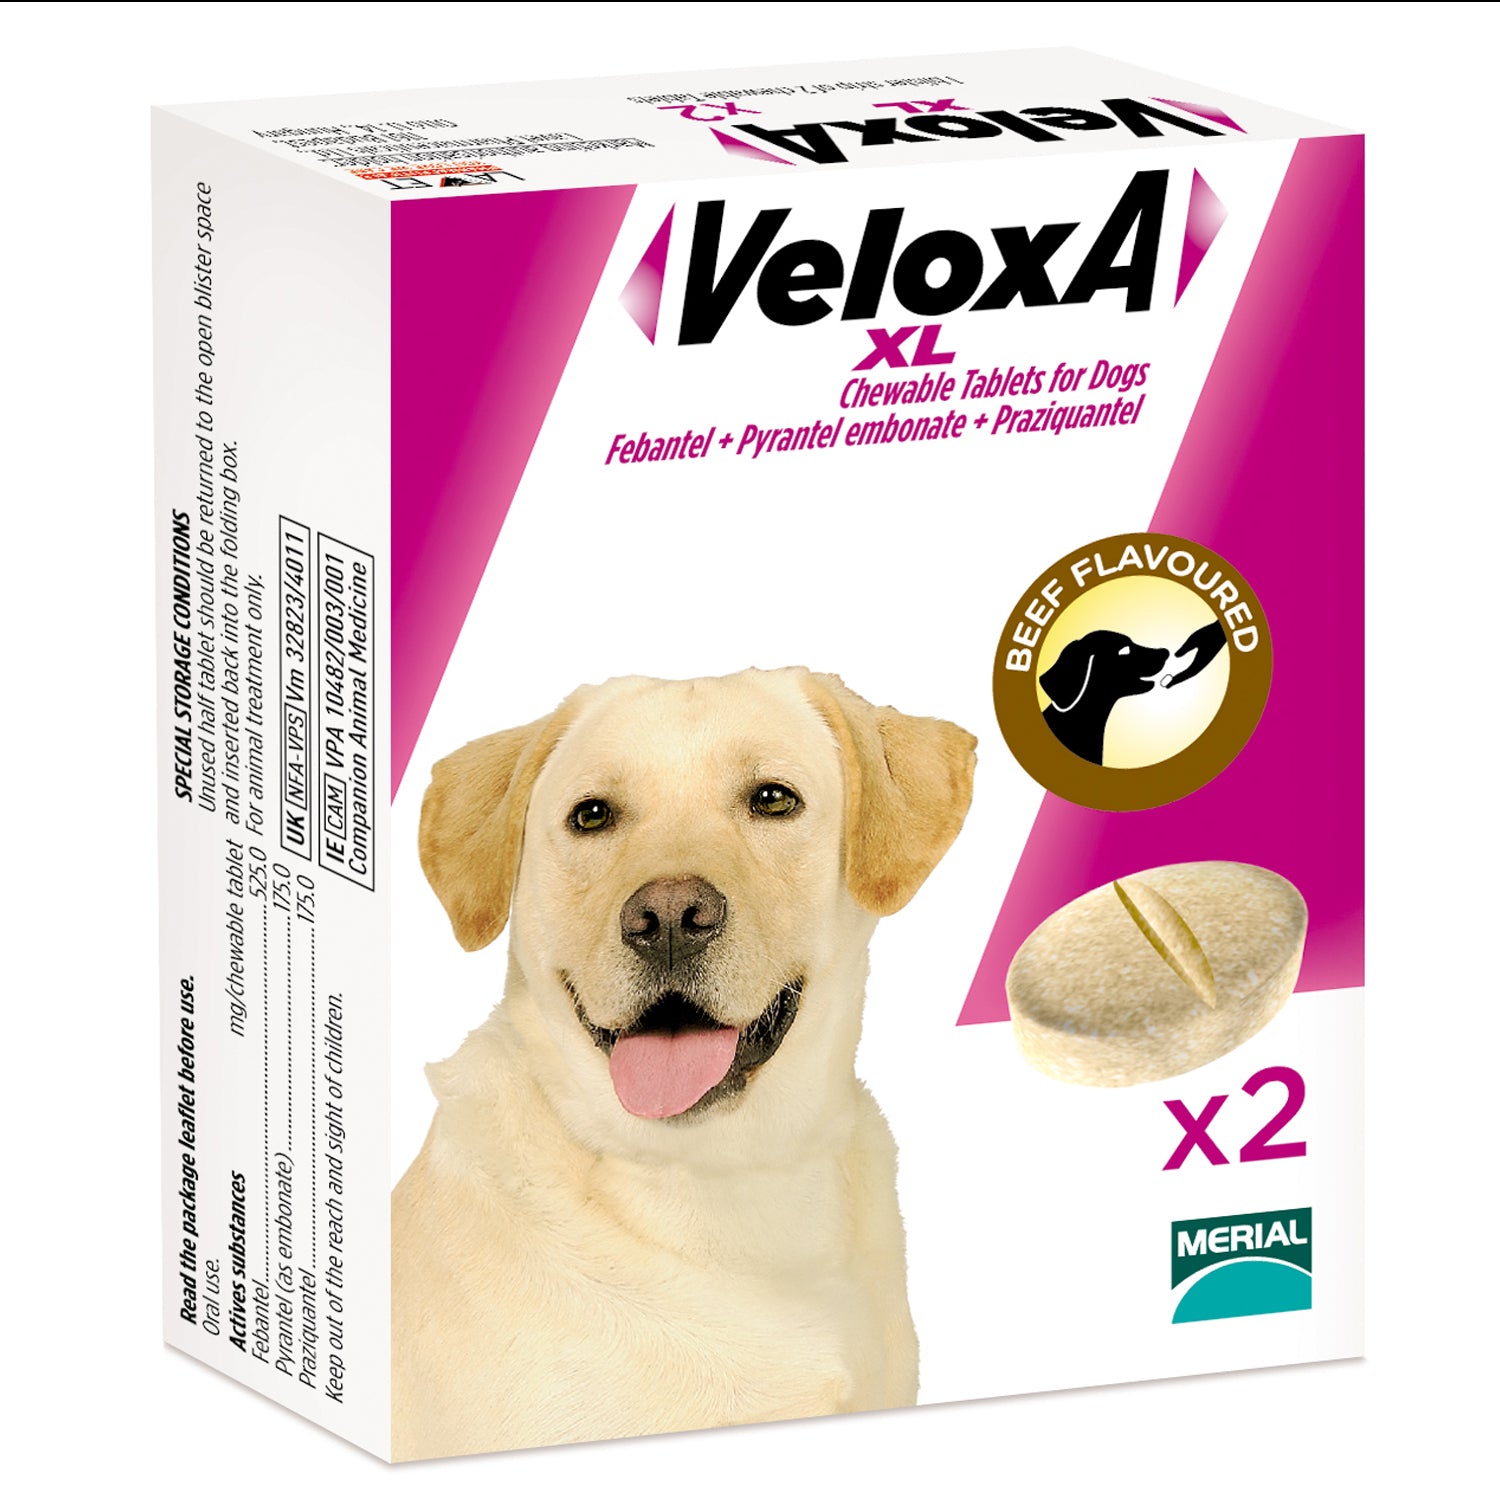 Veloxa Xl Chewable Tablets For Dogs